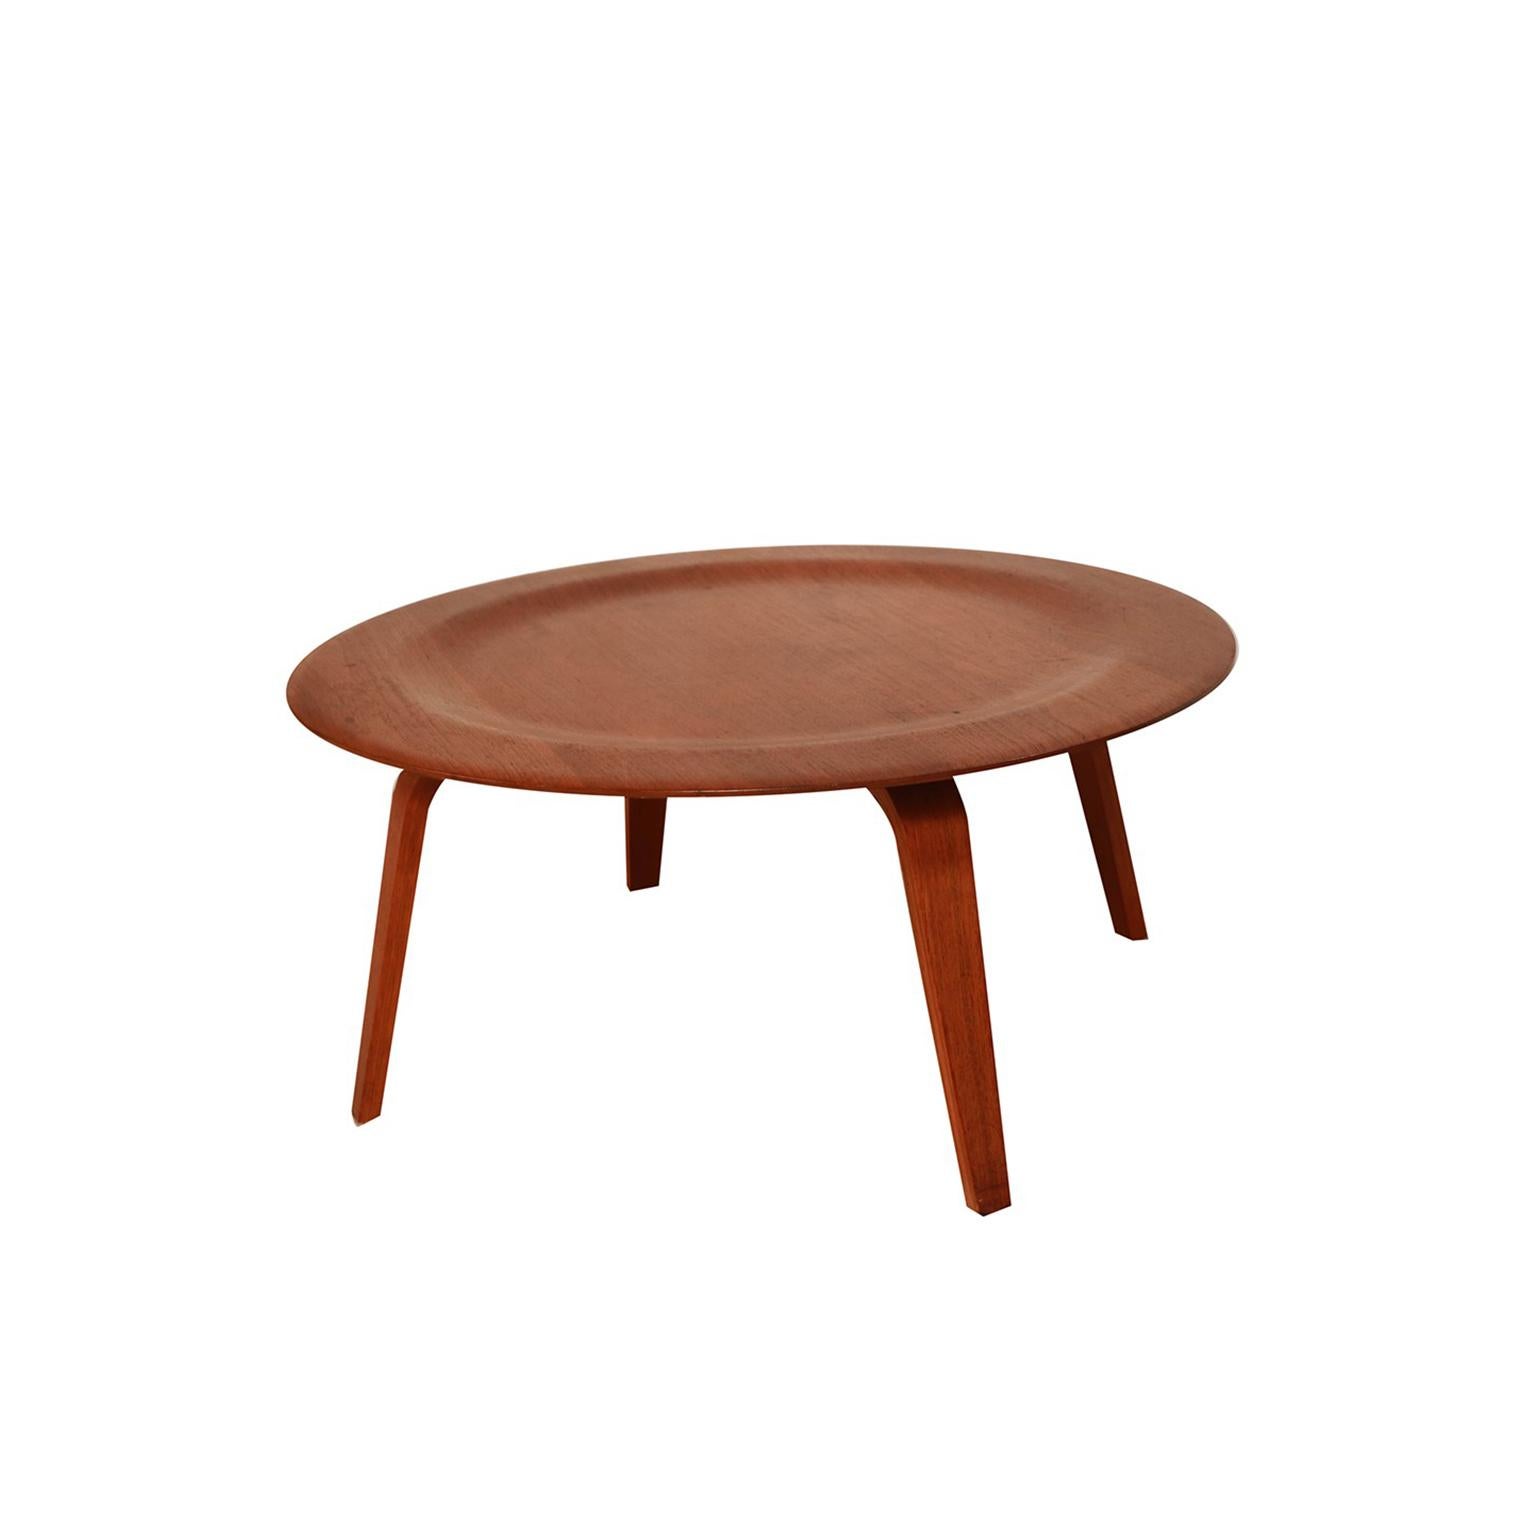 Iconic molded plywood CTW coffee table designed by Charles Eames for Herman Miller. Features a beautifully grained circular molded walnut plywood top with a wide raised edge and walnut bentwood legs all with the original finish. This Classic example